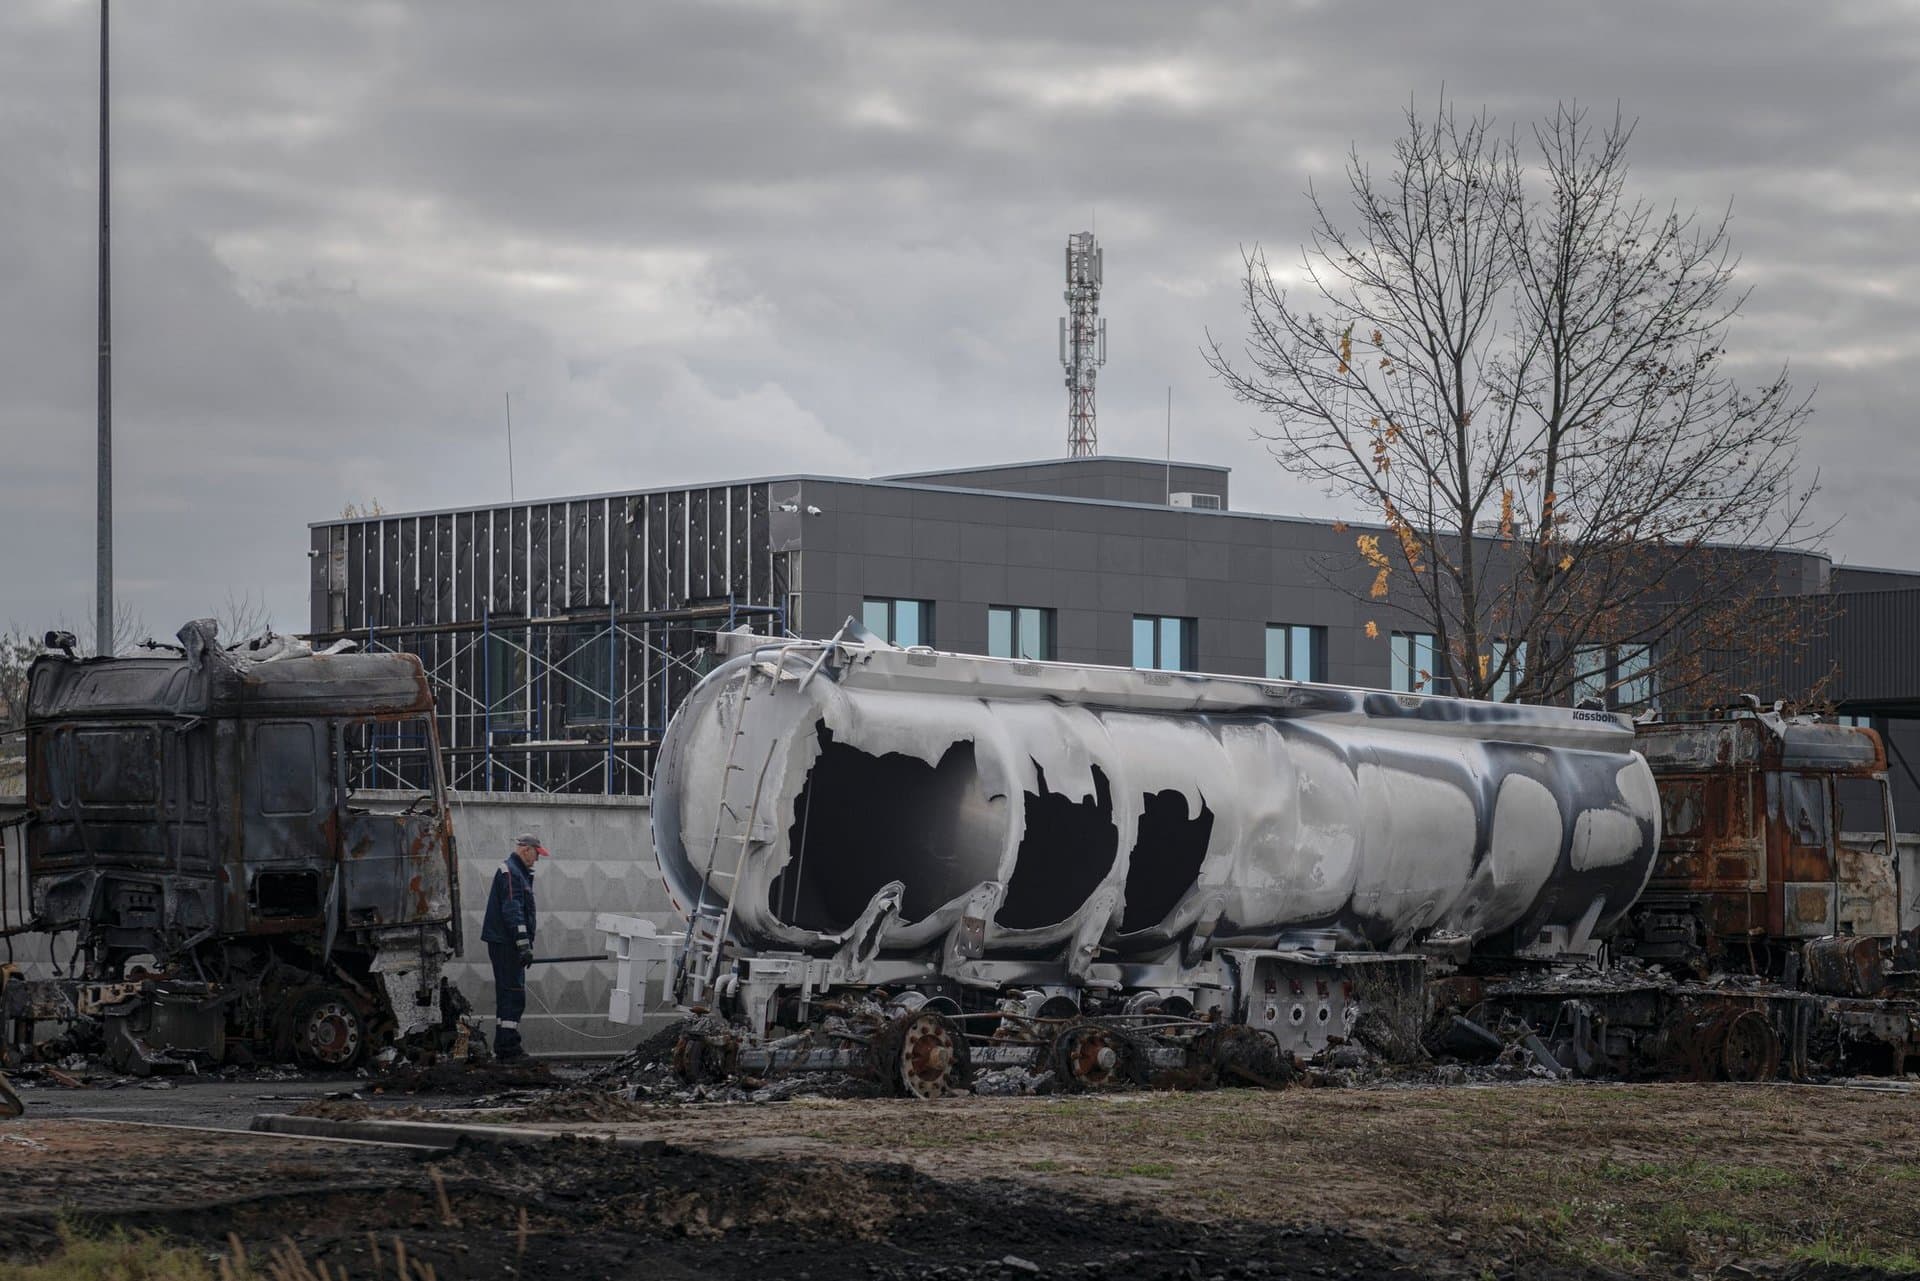 A view of a fuel depot hit by Russian missile in the town of Kalynivka